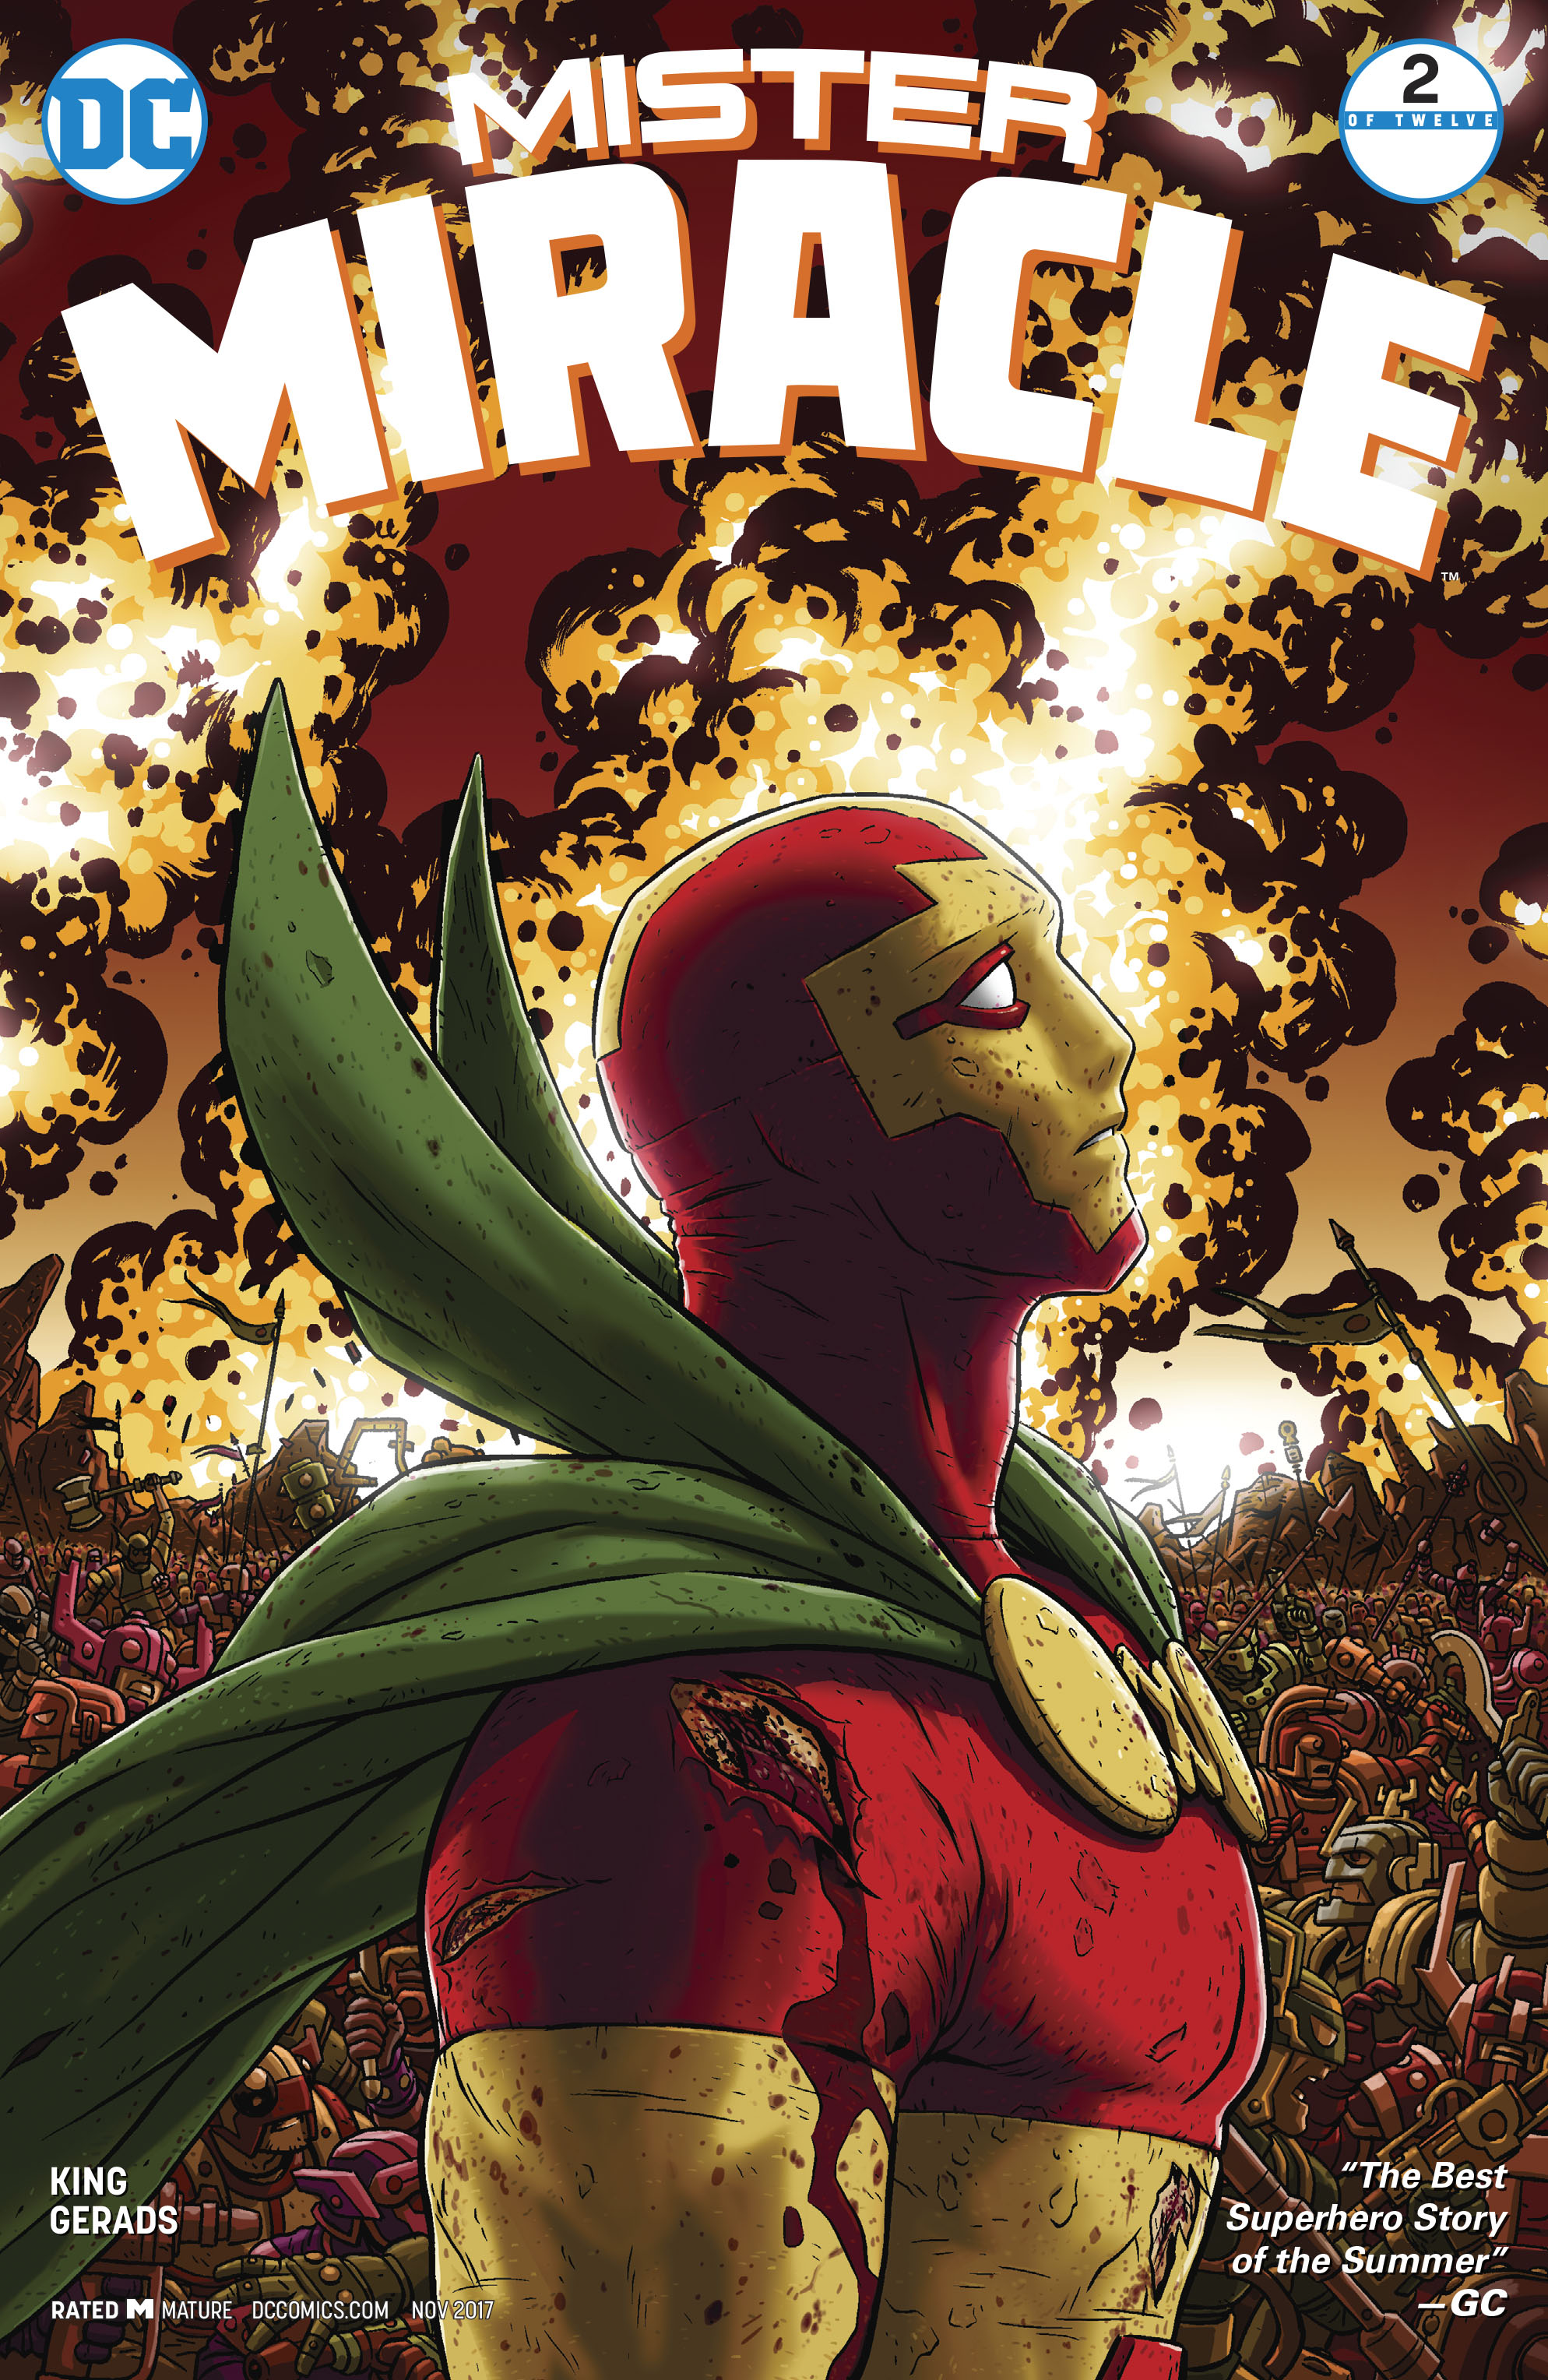 MISTER MIRACLE #2 (OF 12) (MR)